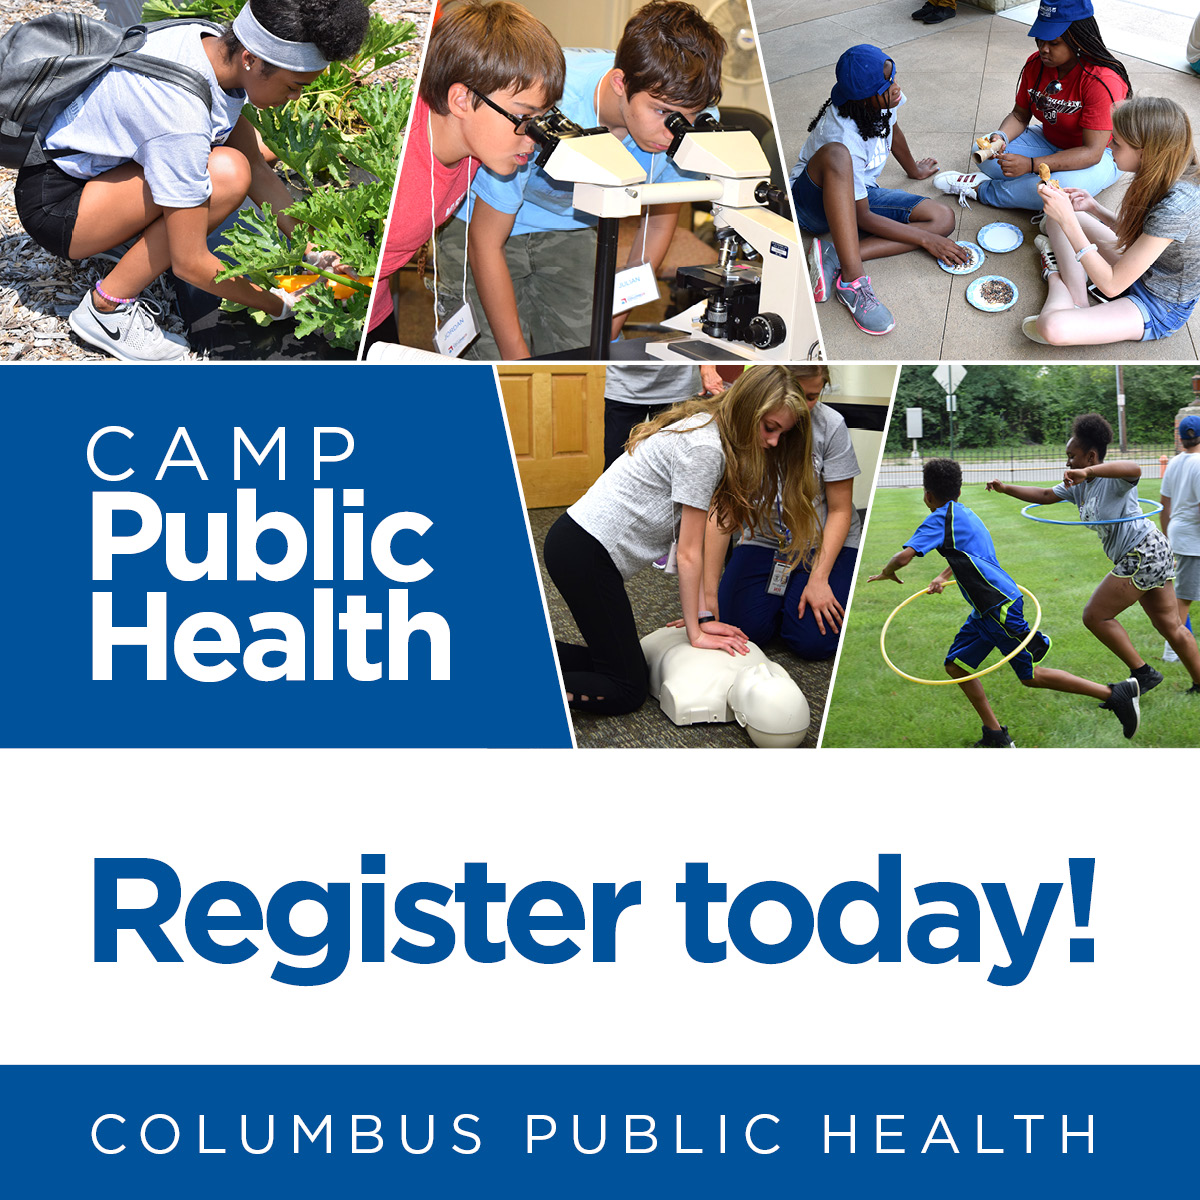 Keep your teen engaged this summer at Camp Public Health! This specialty camp incorporates health, environmental and social sciences and allows young people to explore future careers in Public Health. Register at anc.apm.activecommunities.com/columbusrecpar….